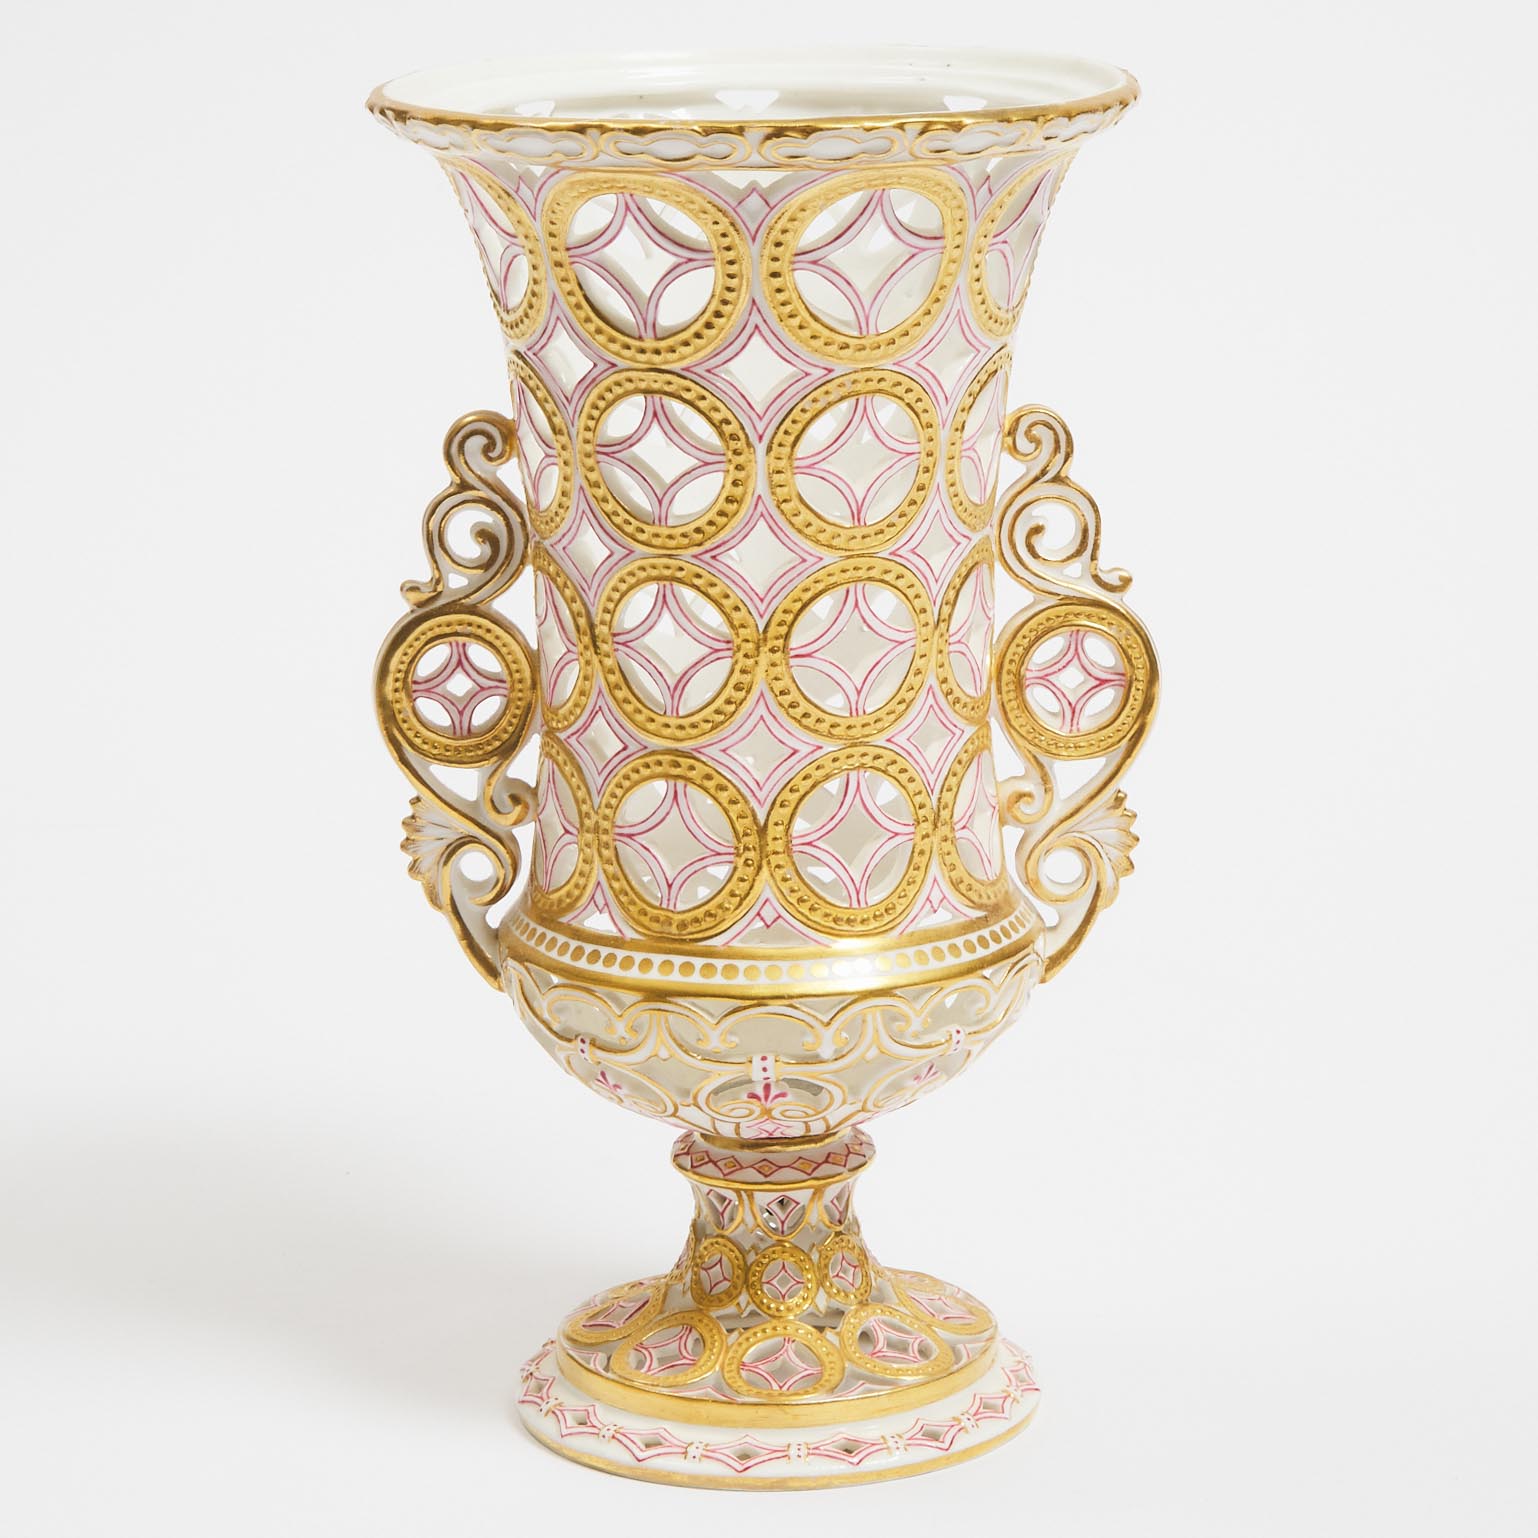 Derby Crown Porcelain Co. Reticulated Two-Handled Vase, c.1880